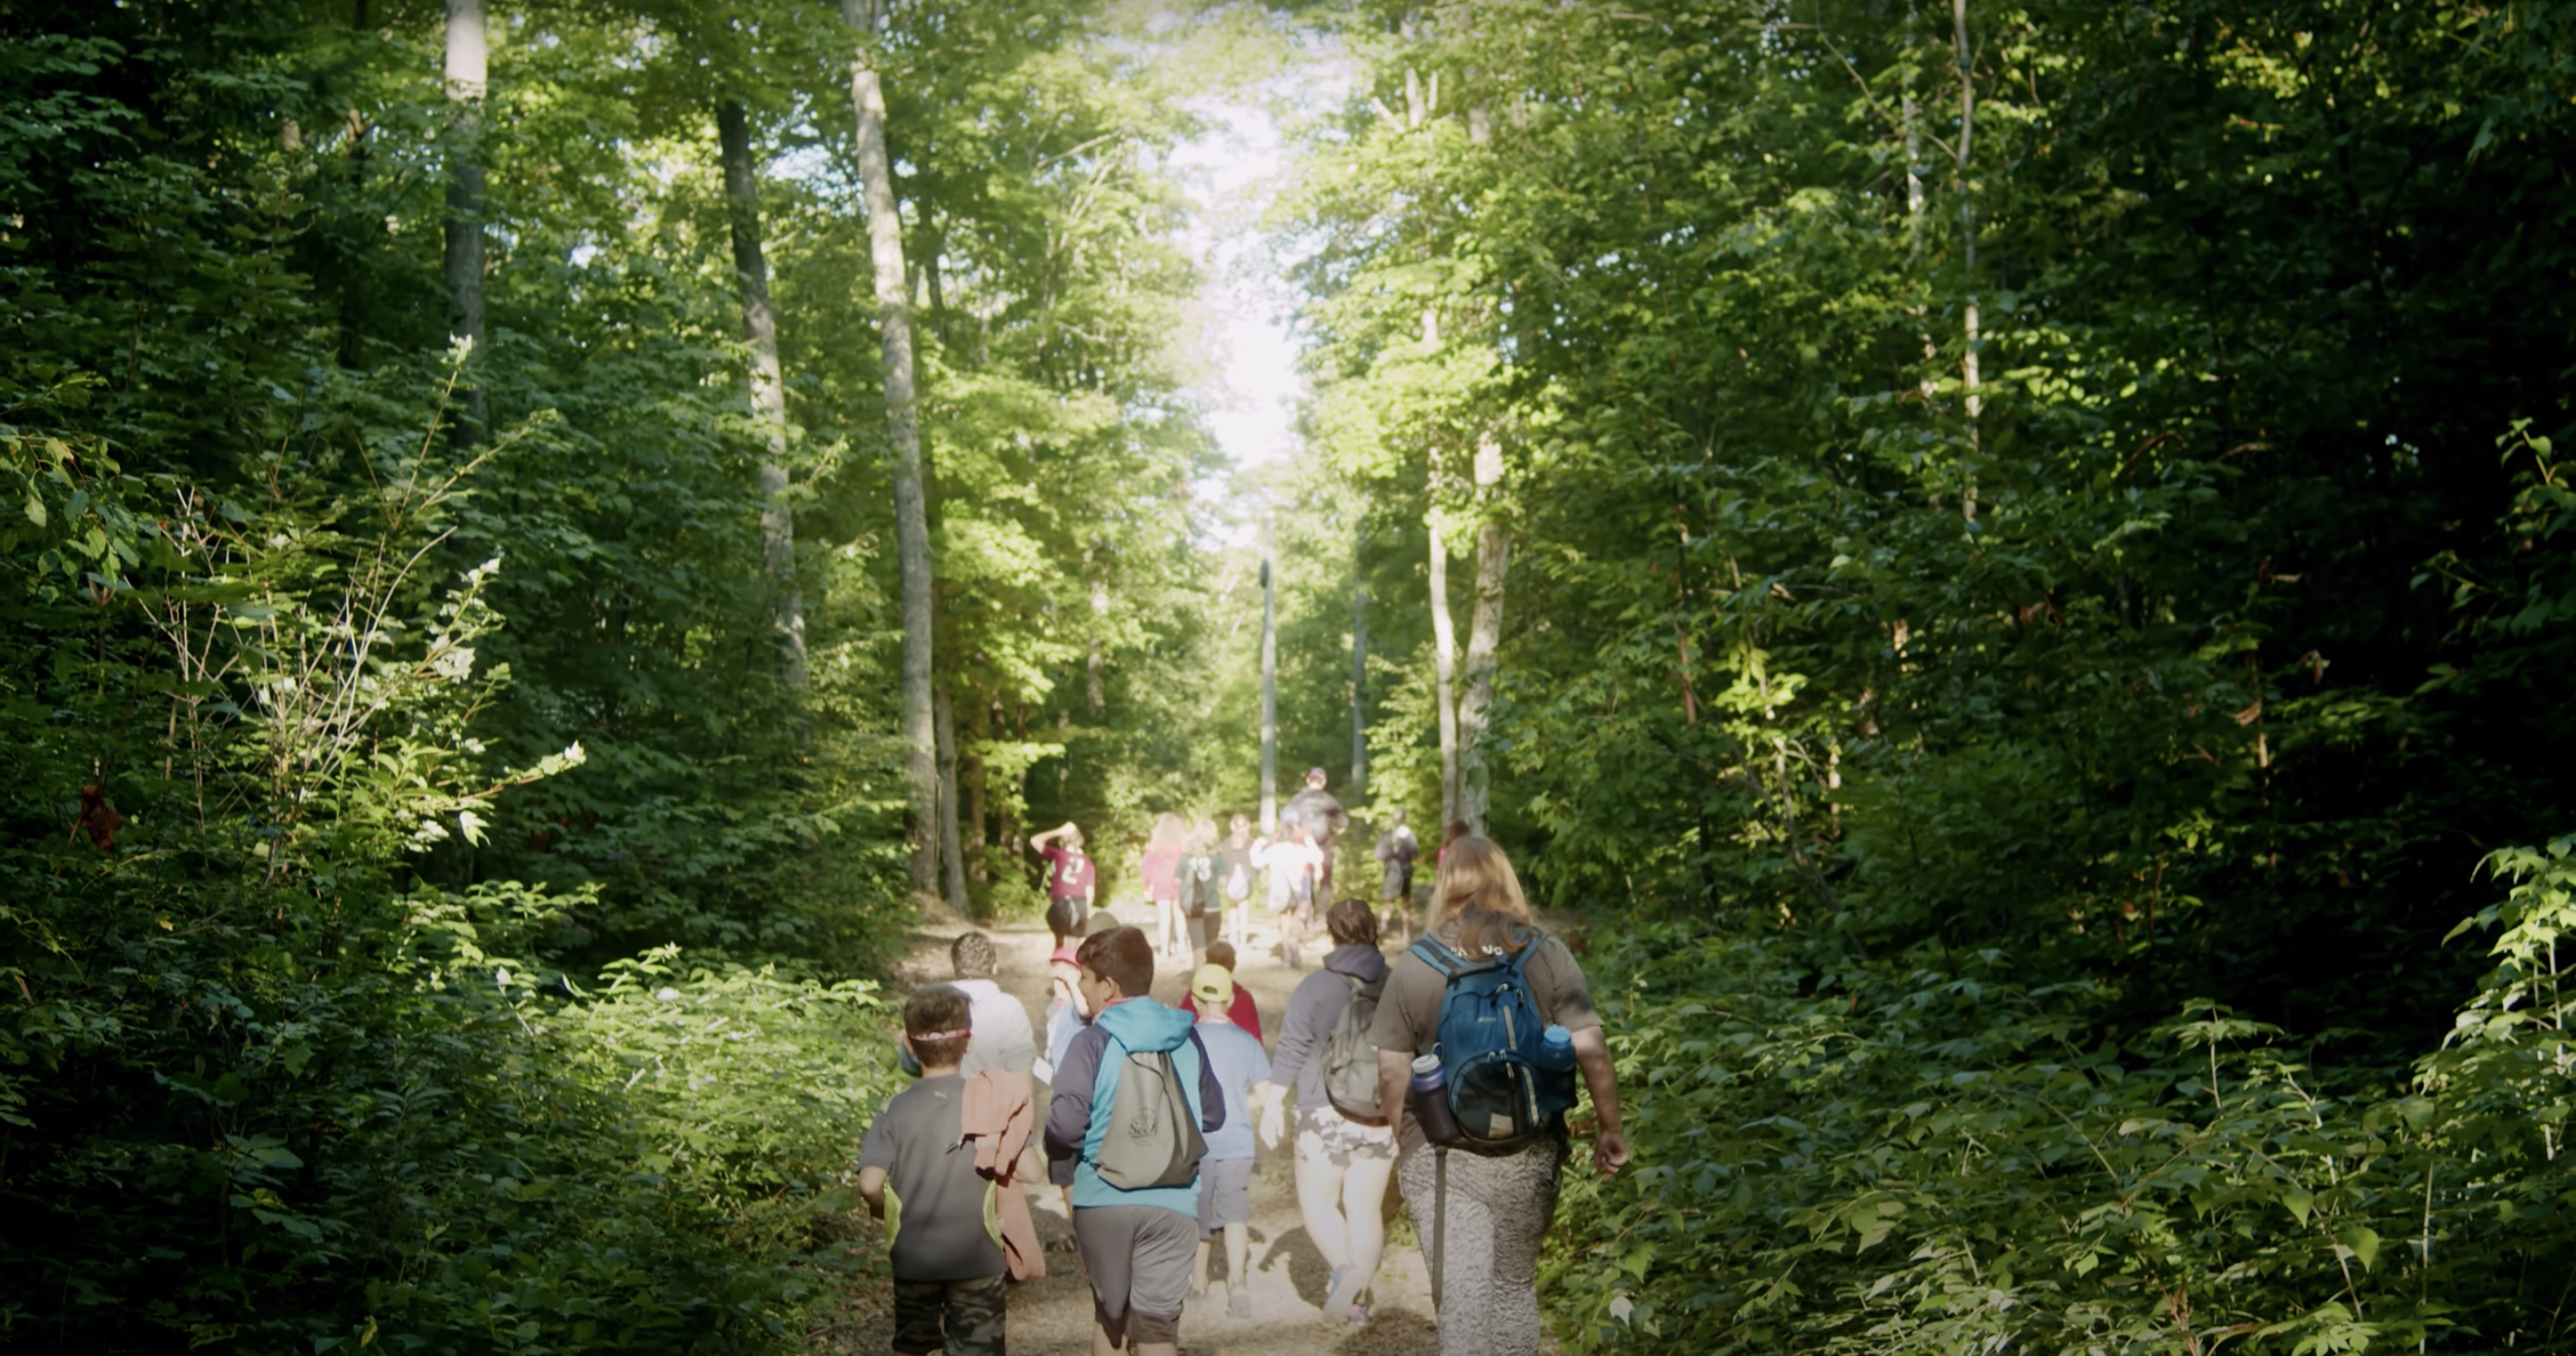 Group of young people walking through nature